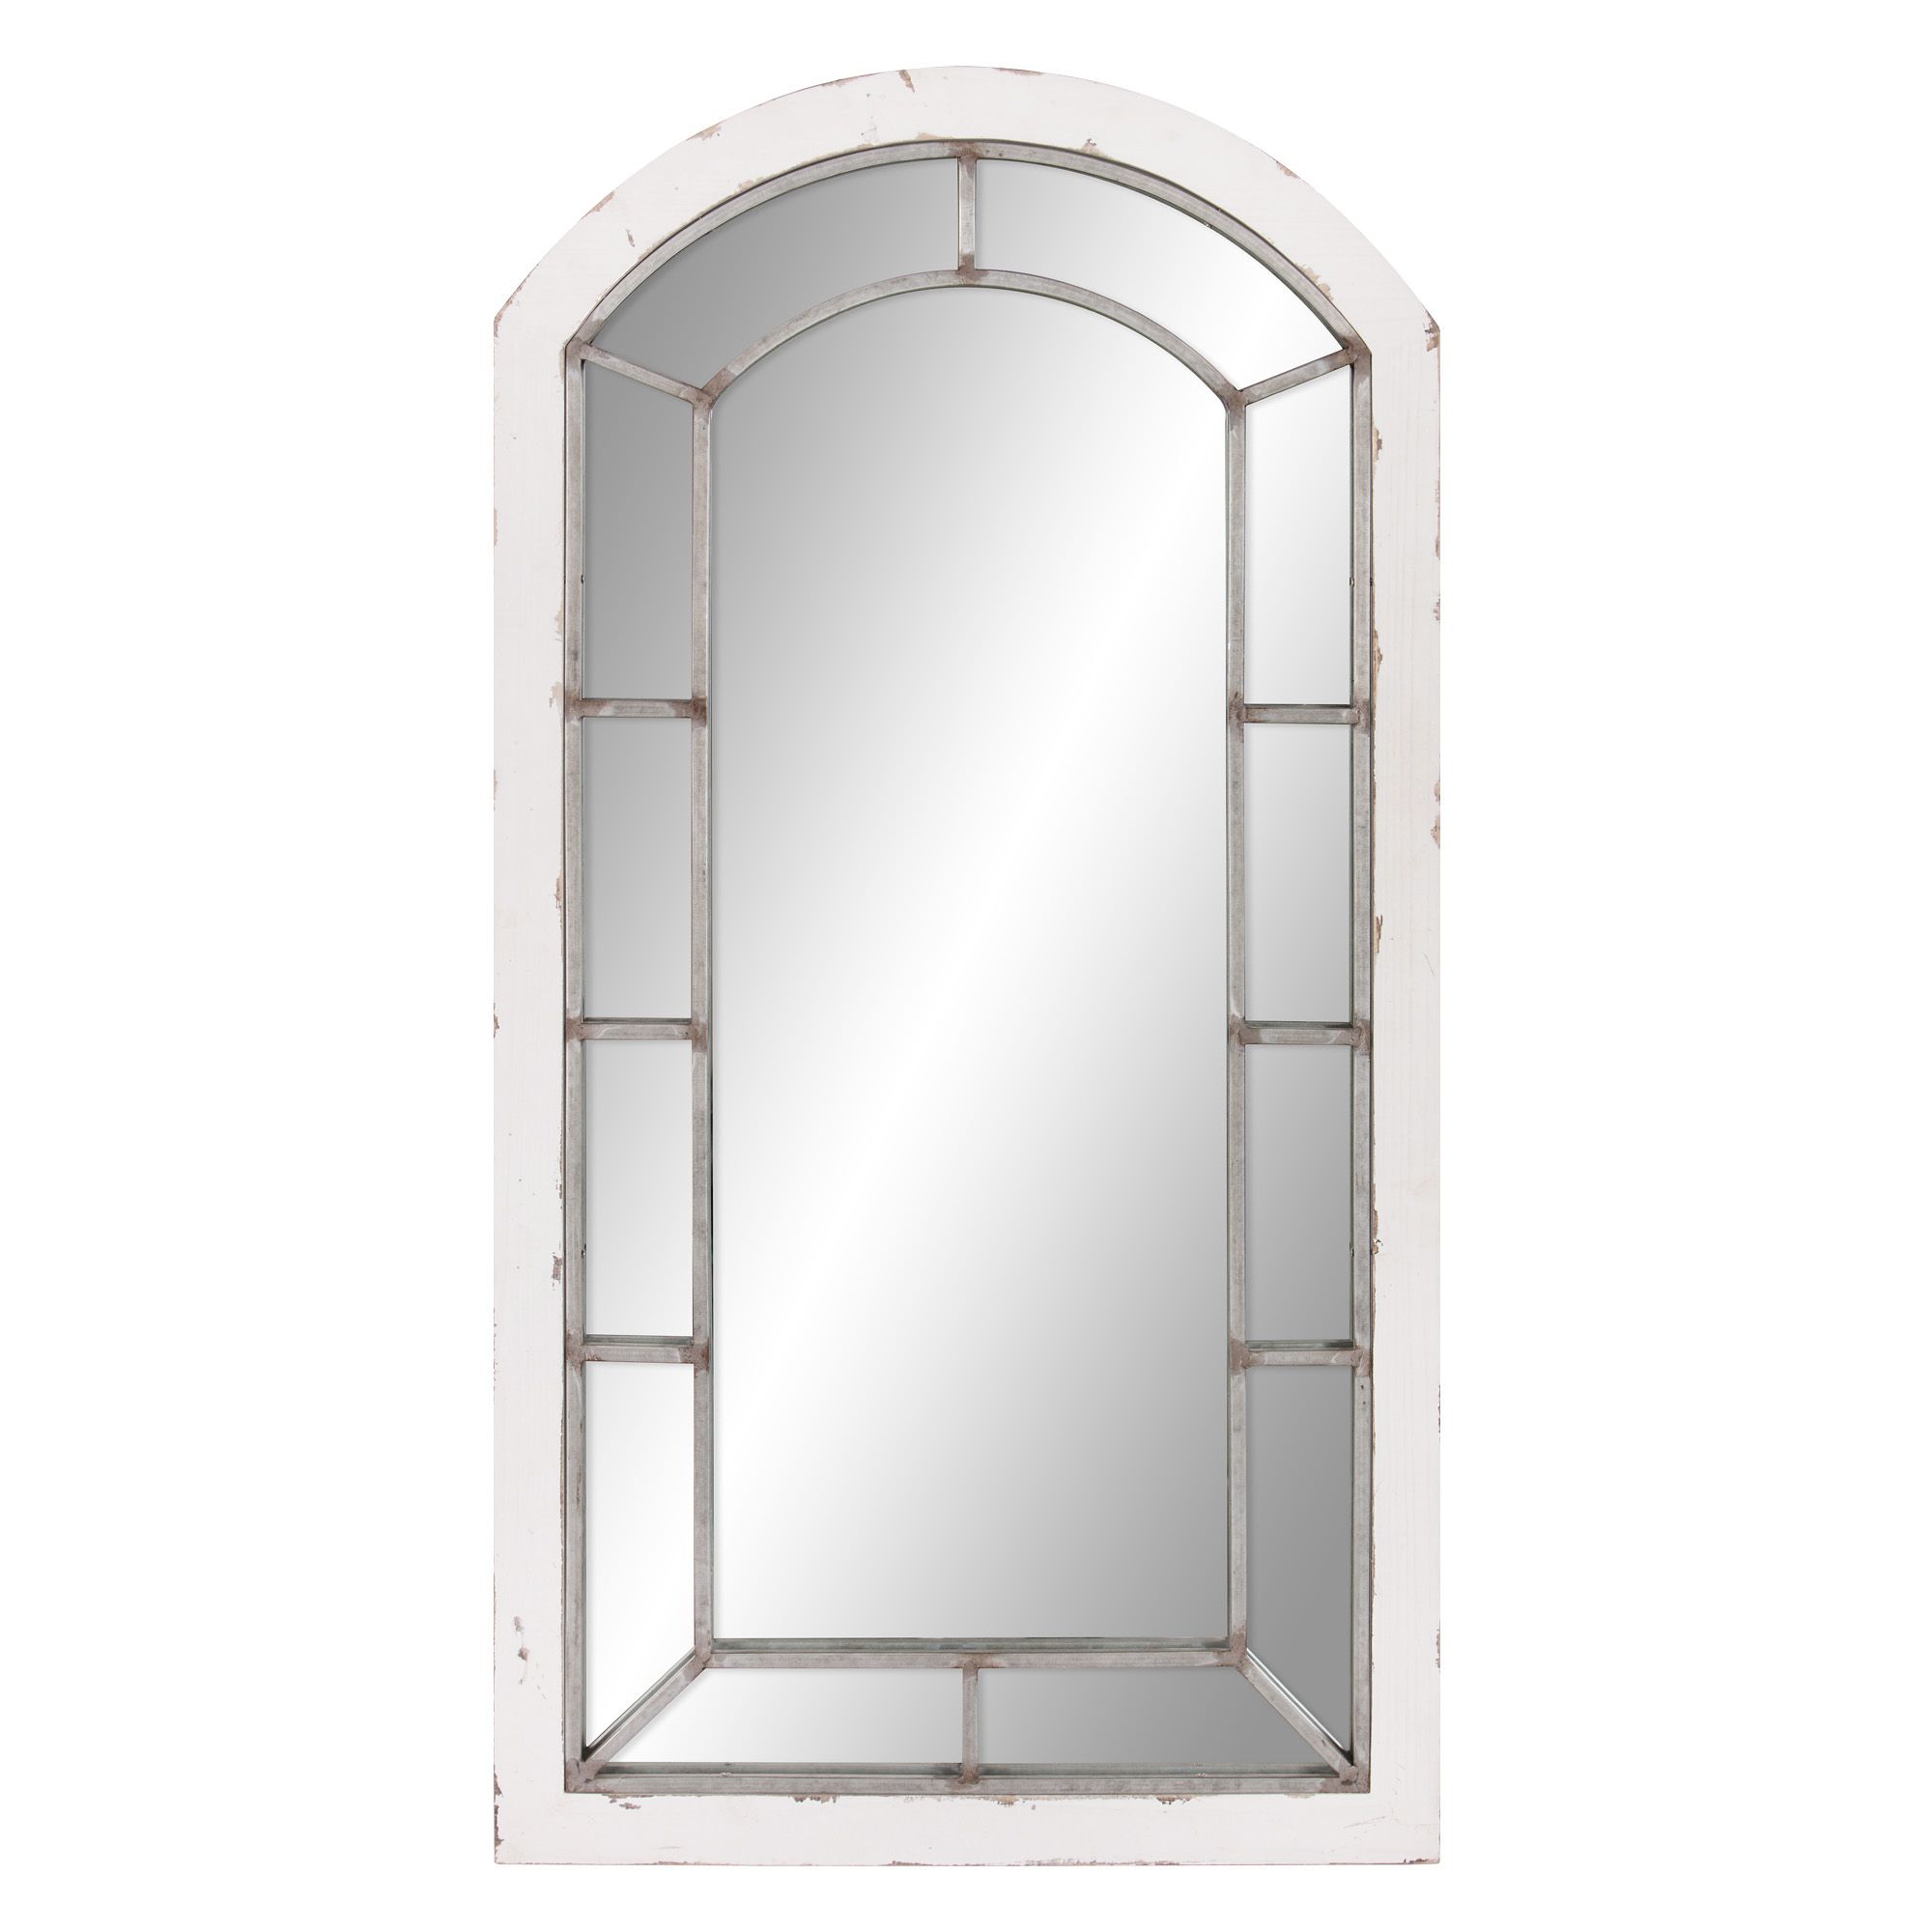 Distressed White And Antique Silver Arch Windowpane Wall Mirror 24"x44 In Antiqued Silver Quatrefoil Wall Mirrors (View 14 of 15)